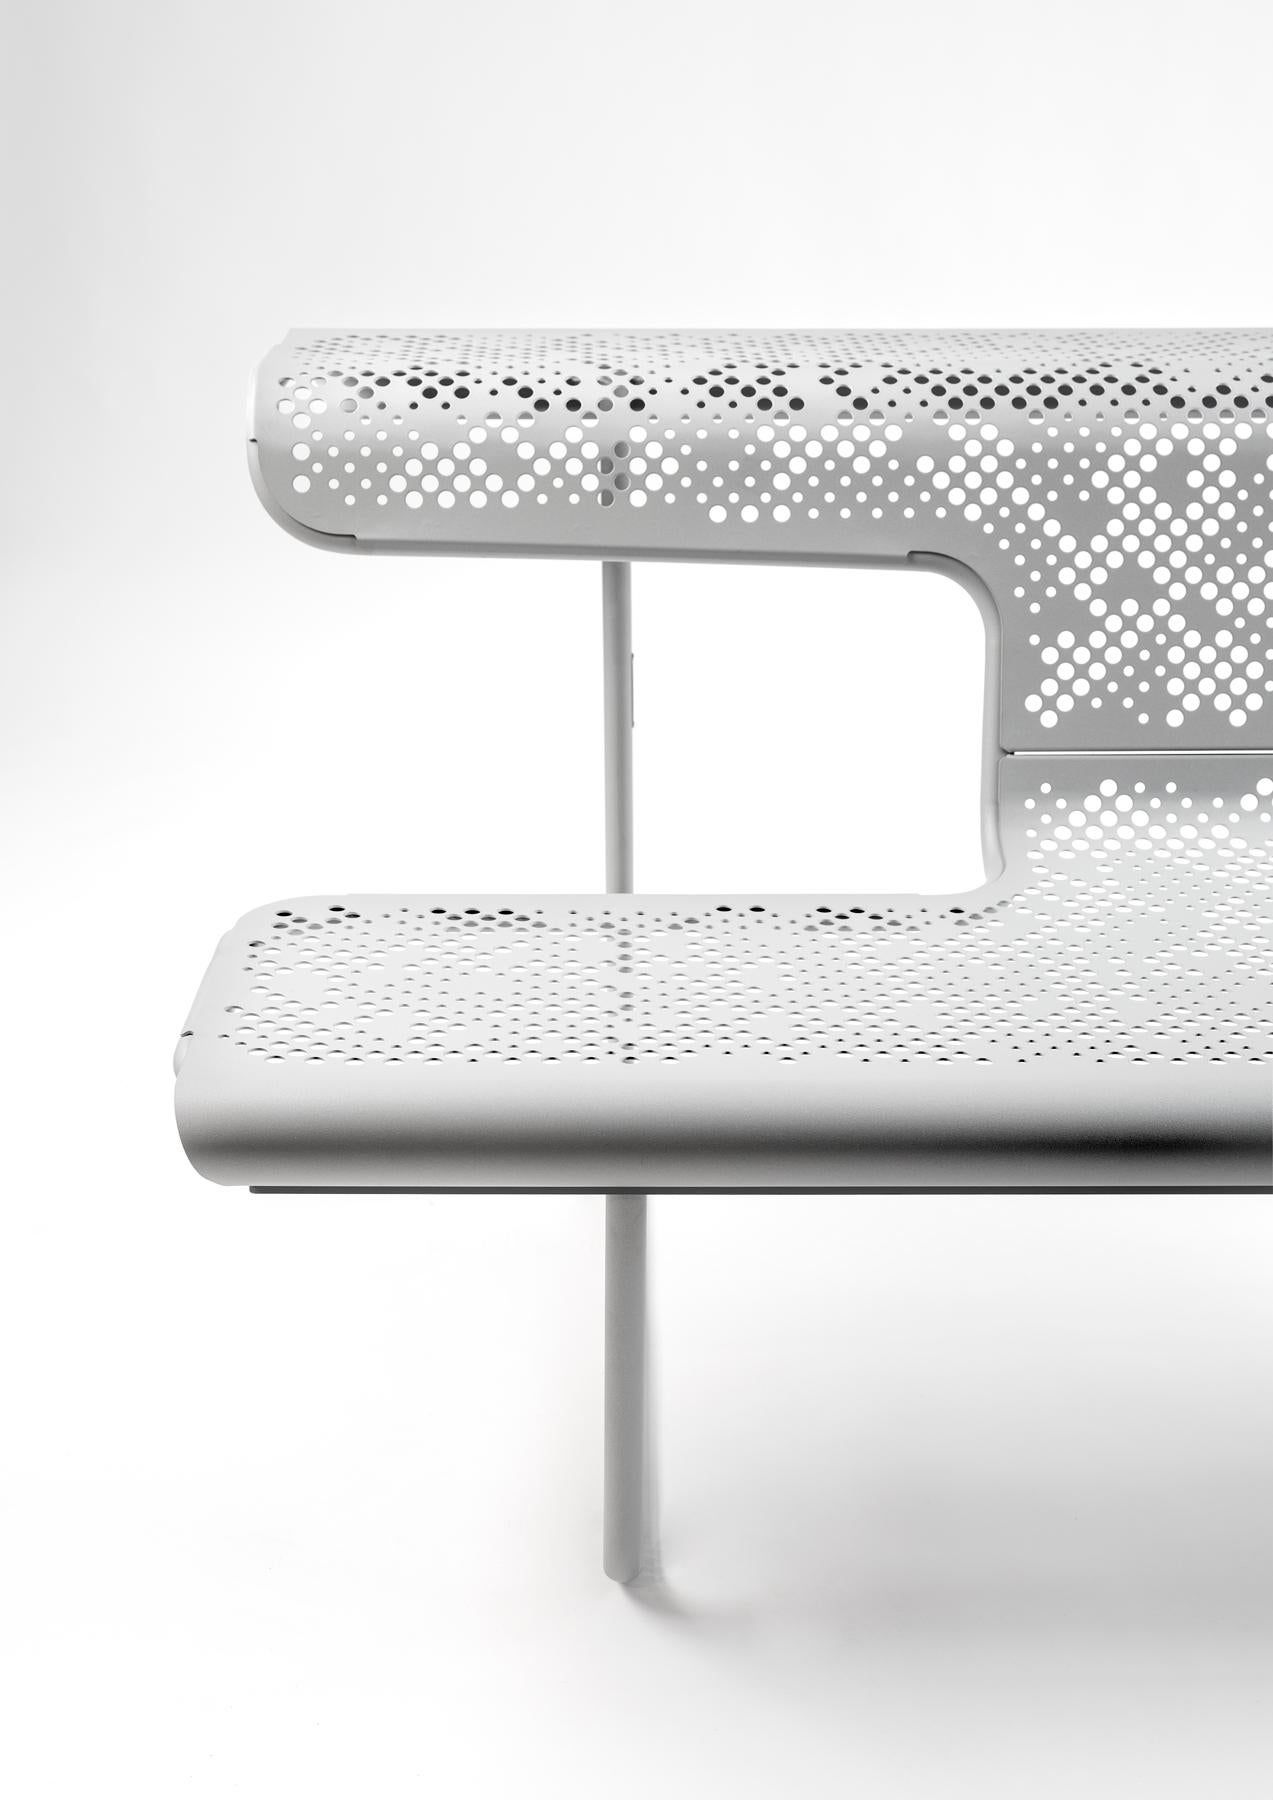 Interior and exterior bench designed by Alfredo Häberli.
Manufactured by BD Barcelona (Spain).

Steel tube legs and perforated steel sheet seats with a cataphoresis covering and painted with a polyester resin, in either bronze or silver